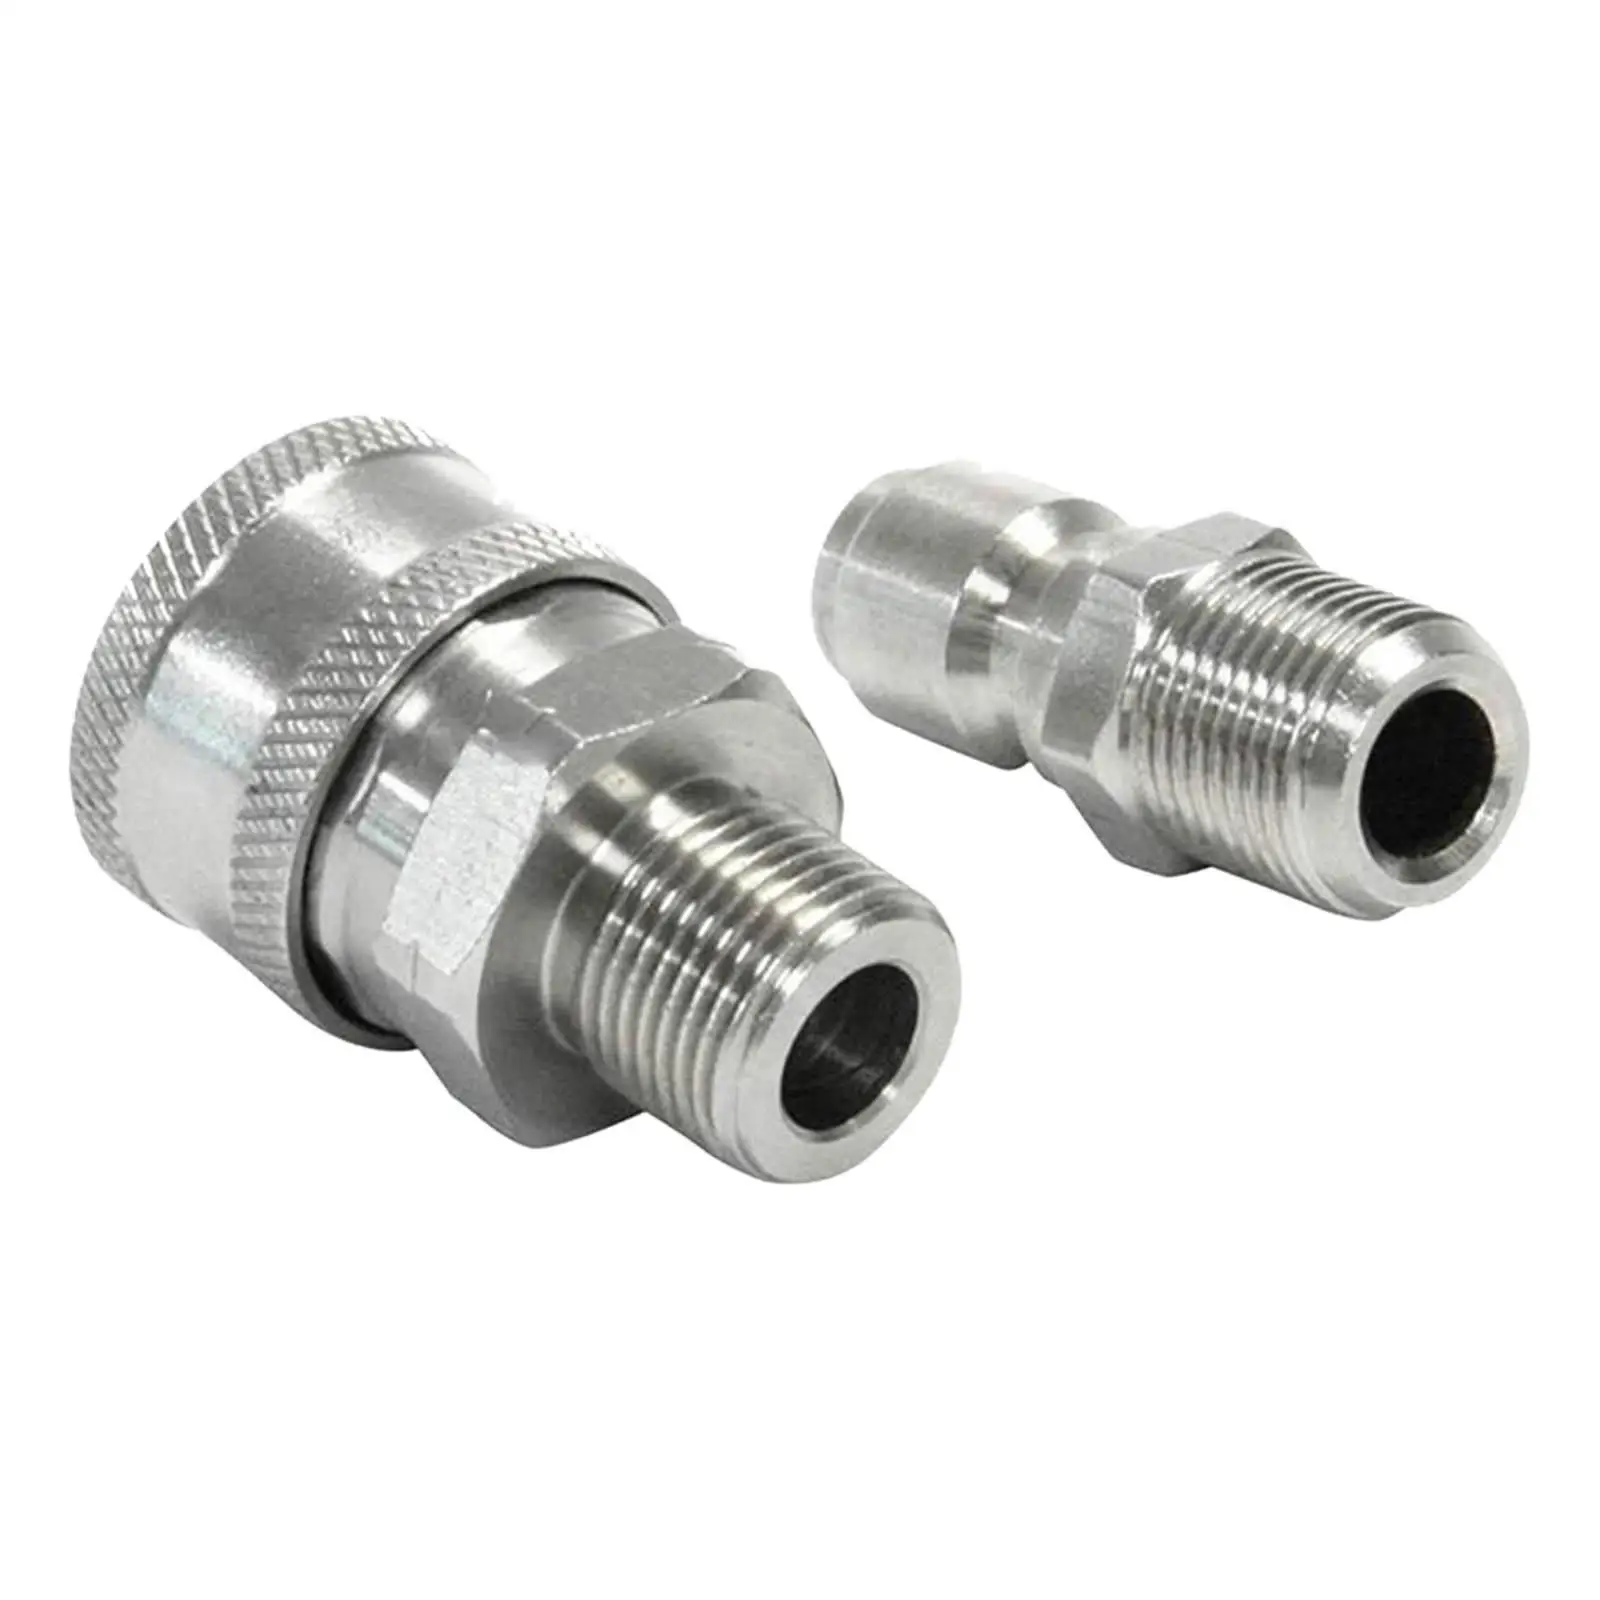 2Pcs Pressure Washer Adapter Set 3/8 inch Replacement Quick Release Connector Daily Tool